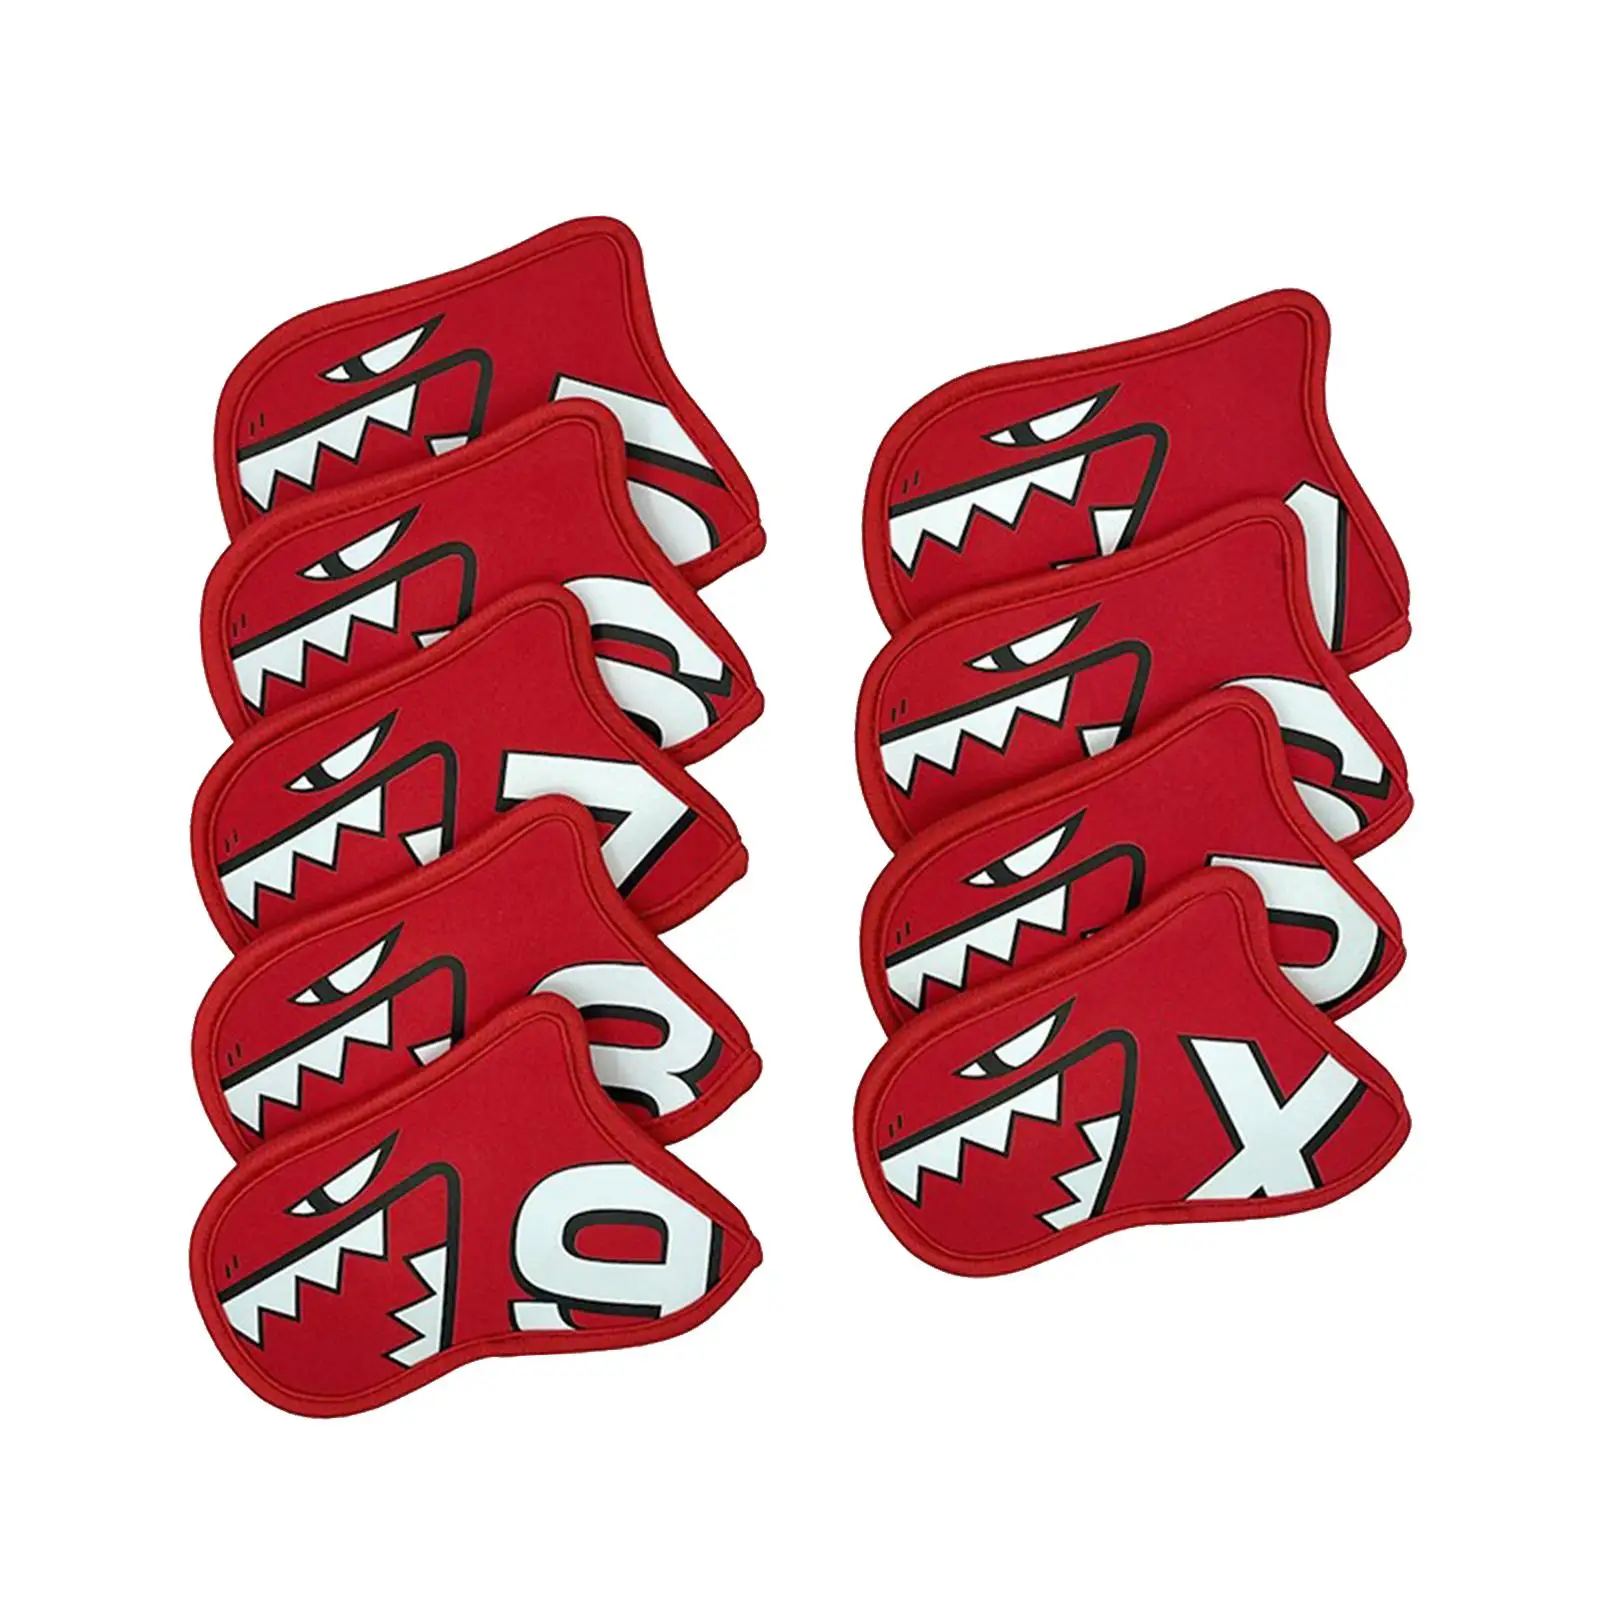 9x Golf Club Head Covers Gift Wrap Socks Water Resistant Golf Iron Covers Set for Beginners Player Practice Club Display Golfer